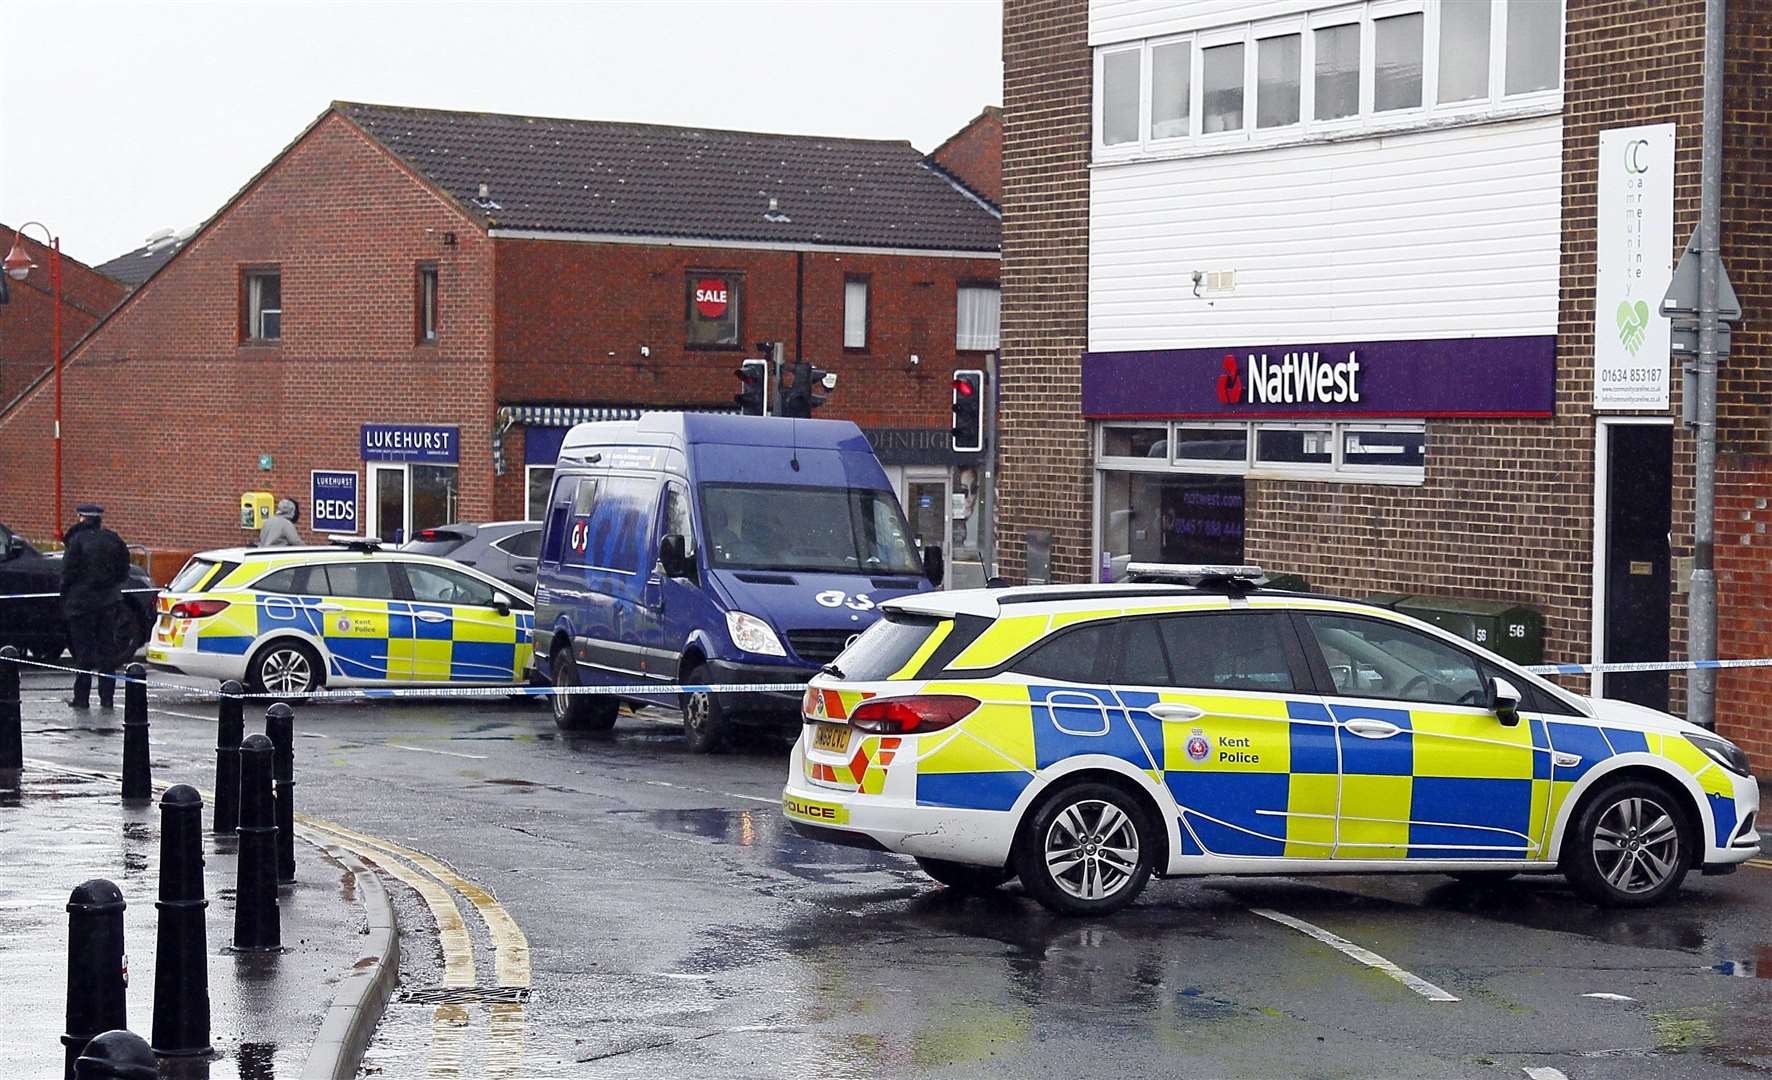 The scene in High Street, Rainham at the time of the robbery. Picture: Sean Aidan